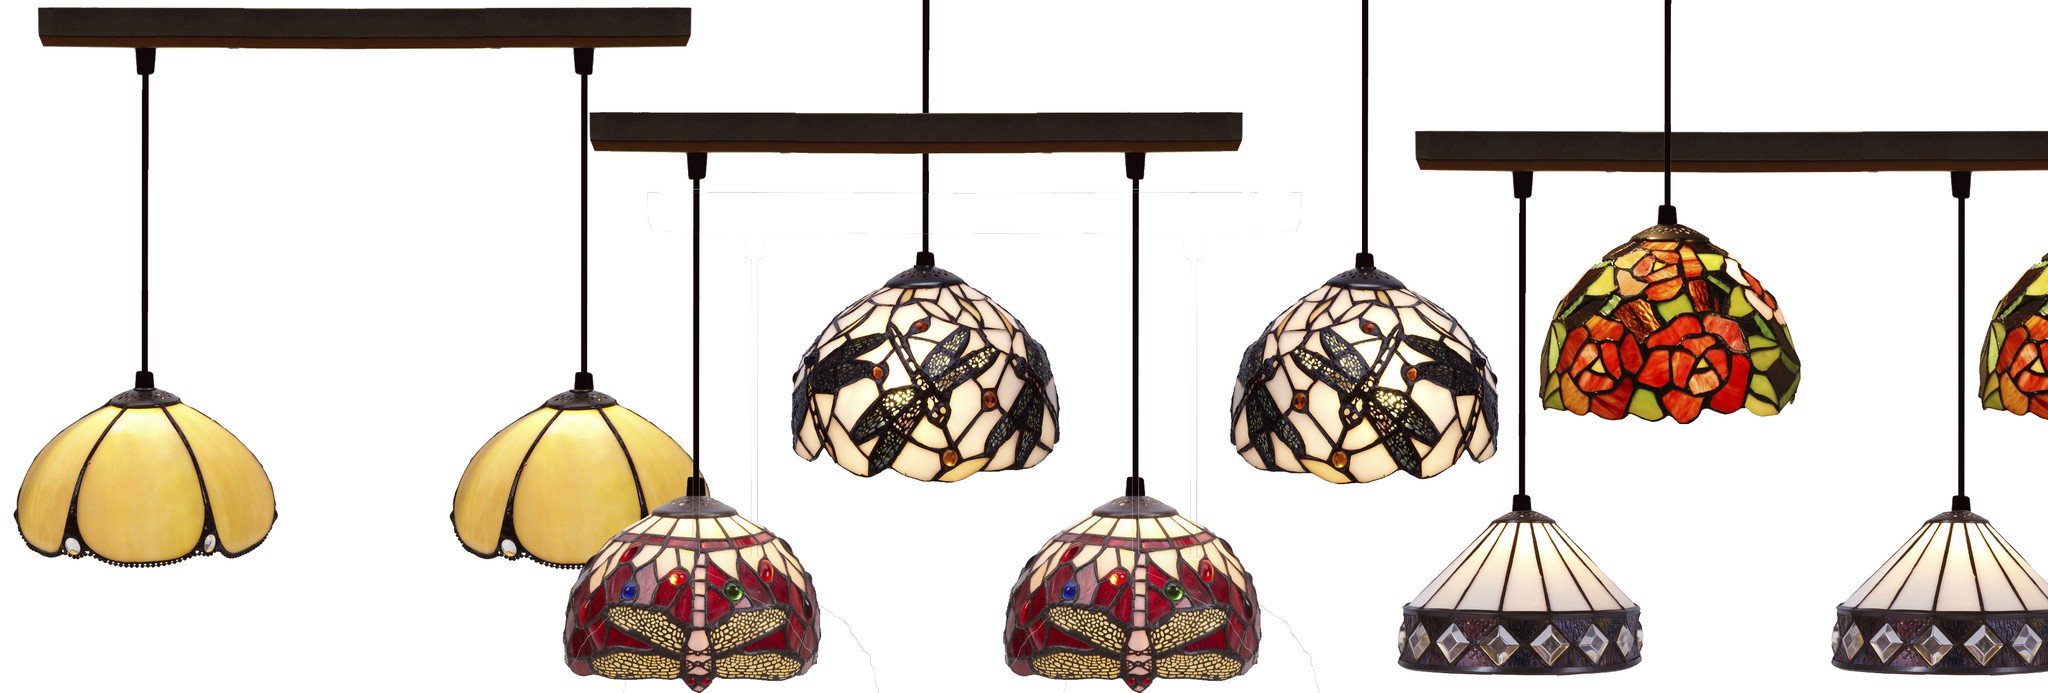 Hanging lamps with two Tiffany lampshades